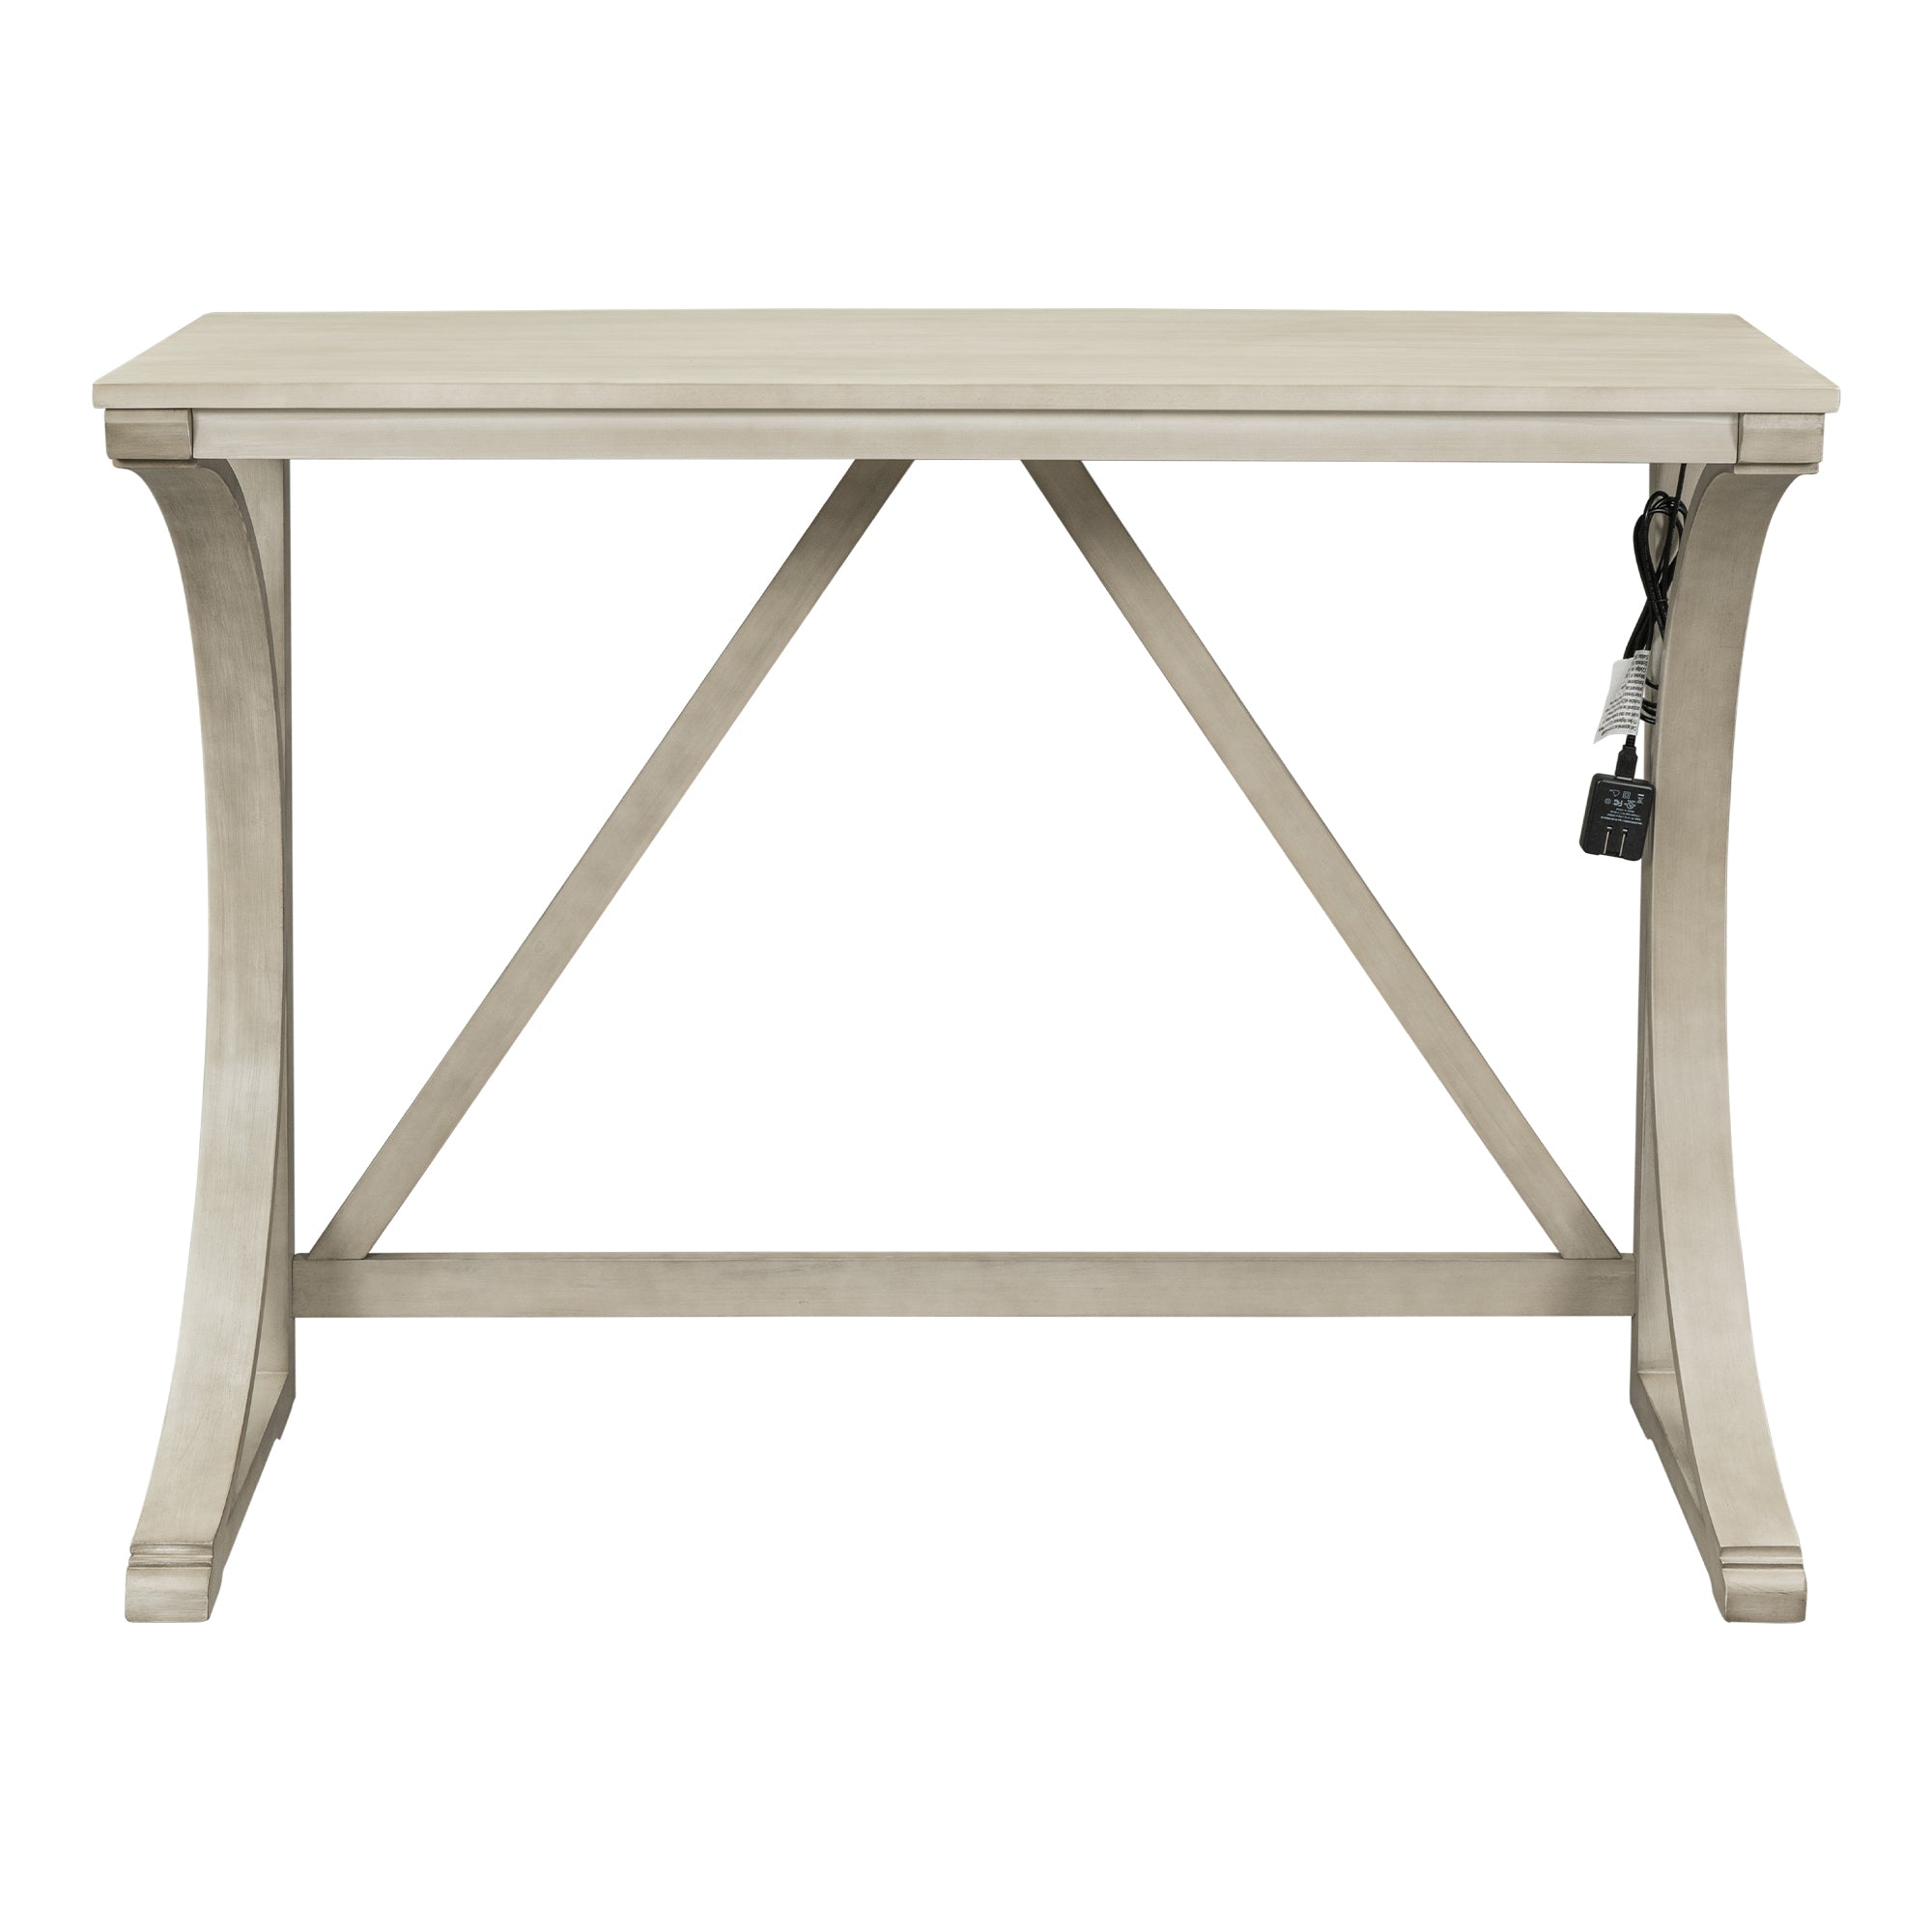 Farmhouse 3 Piece Counter Height Dining Table wood-wood-cream-seats 2-wood-dining room-solid